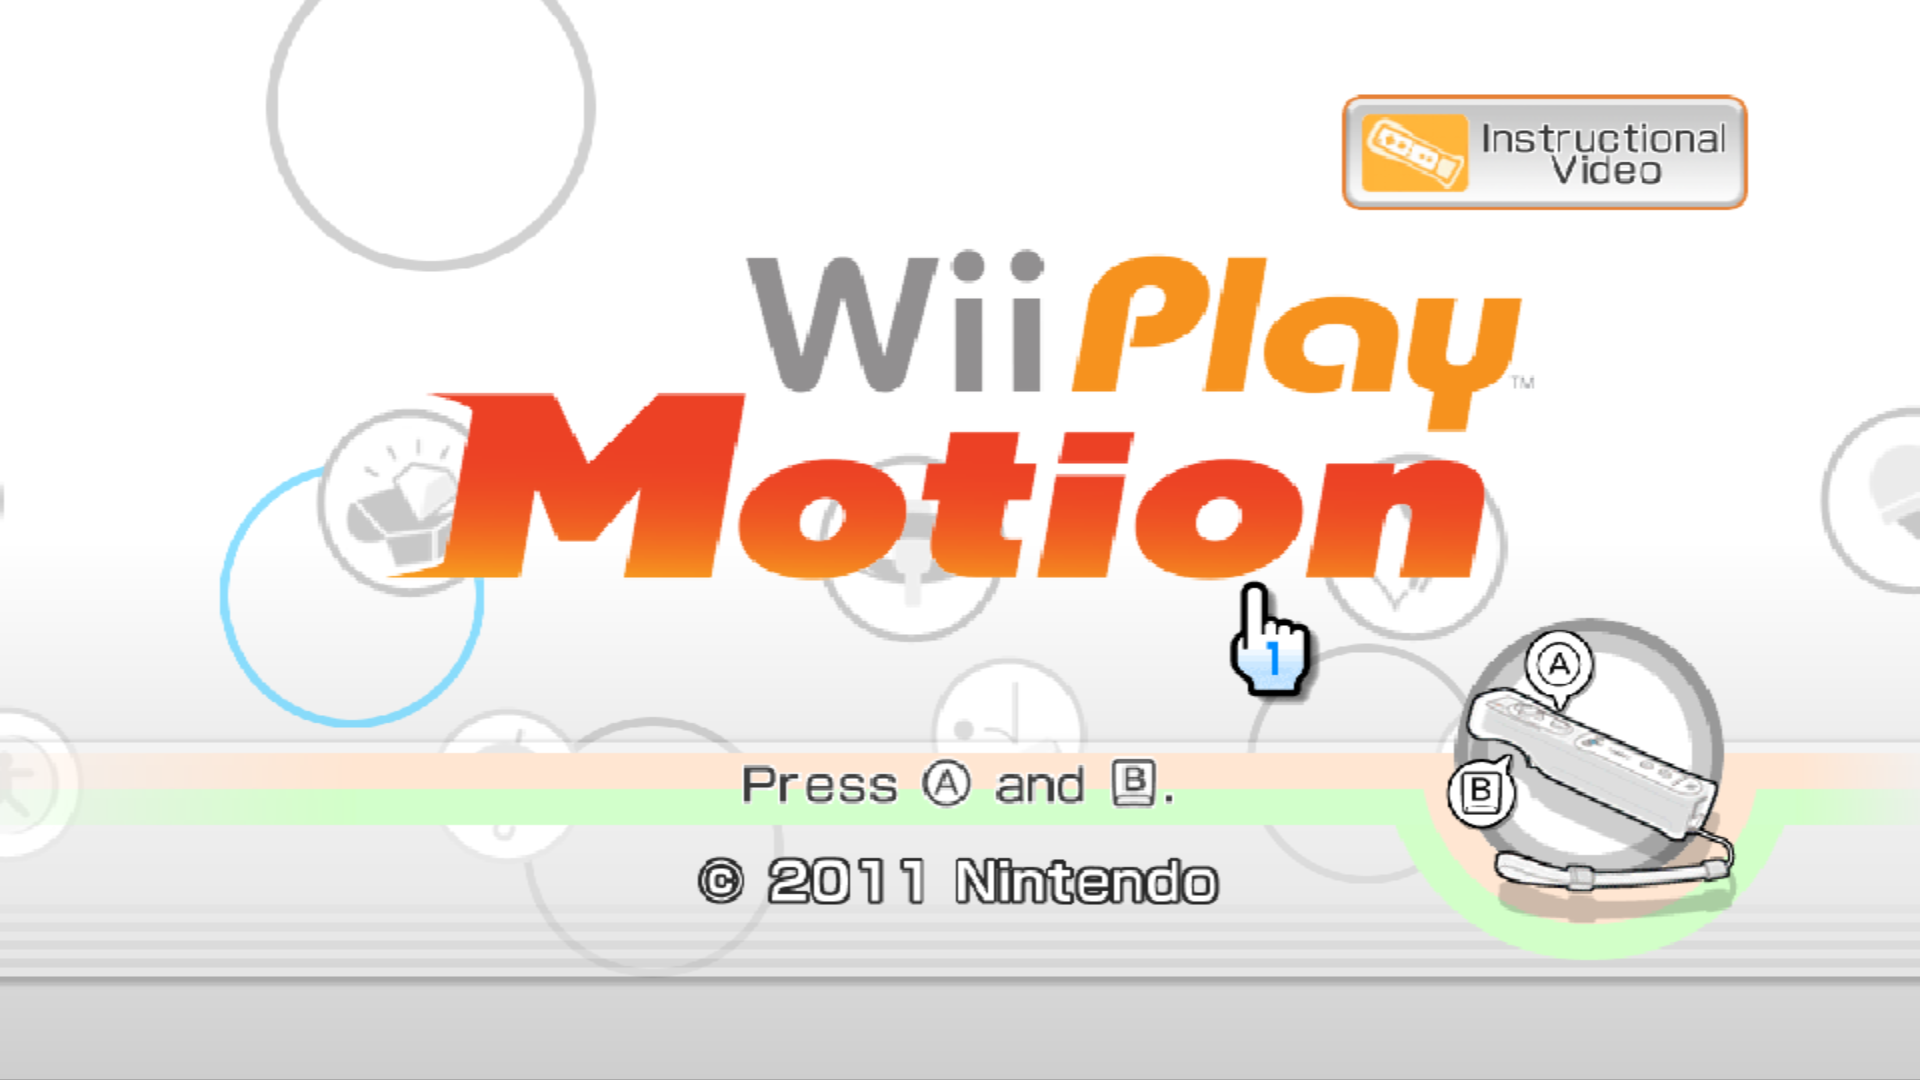 Wii Play: Motion - Nintendo Wii Game